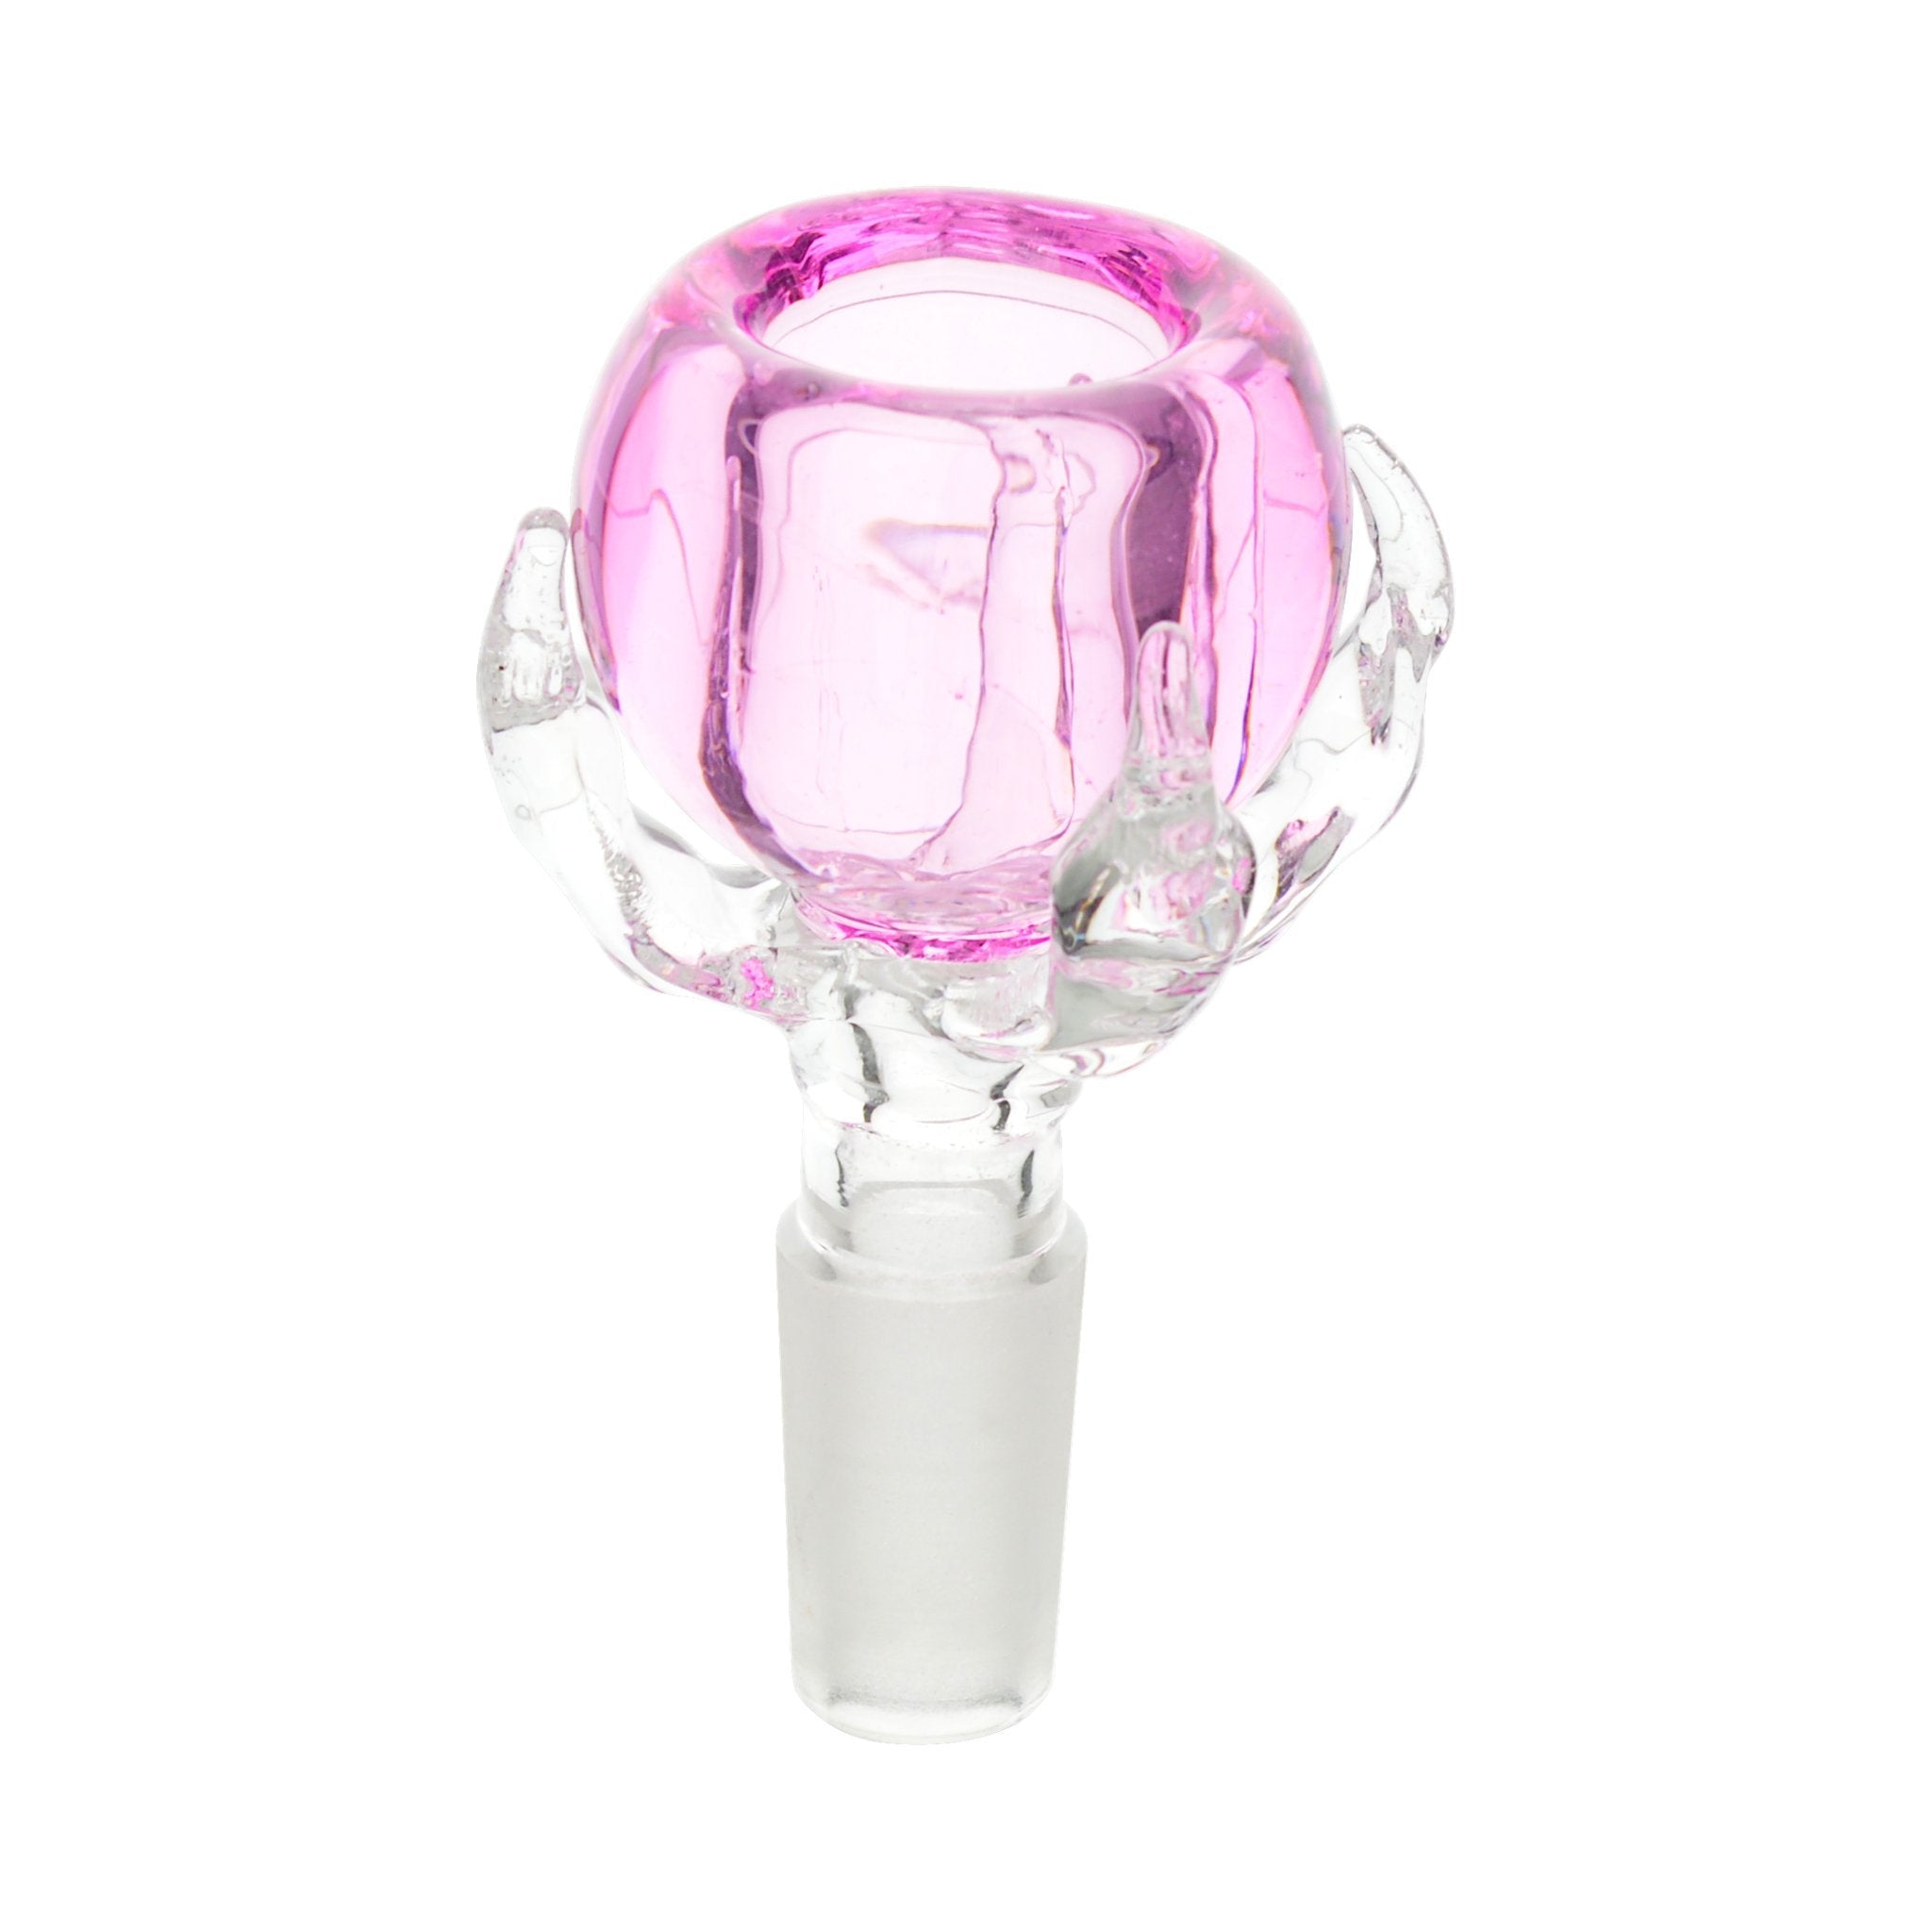 14mm Male Pink Claw Bong Bowl Bowl Volcanee 